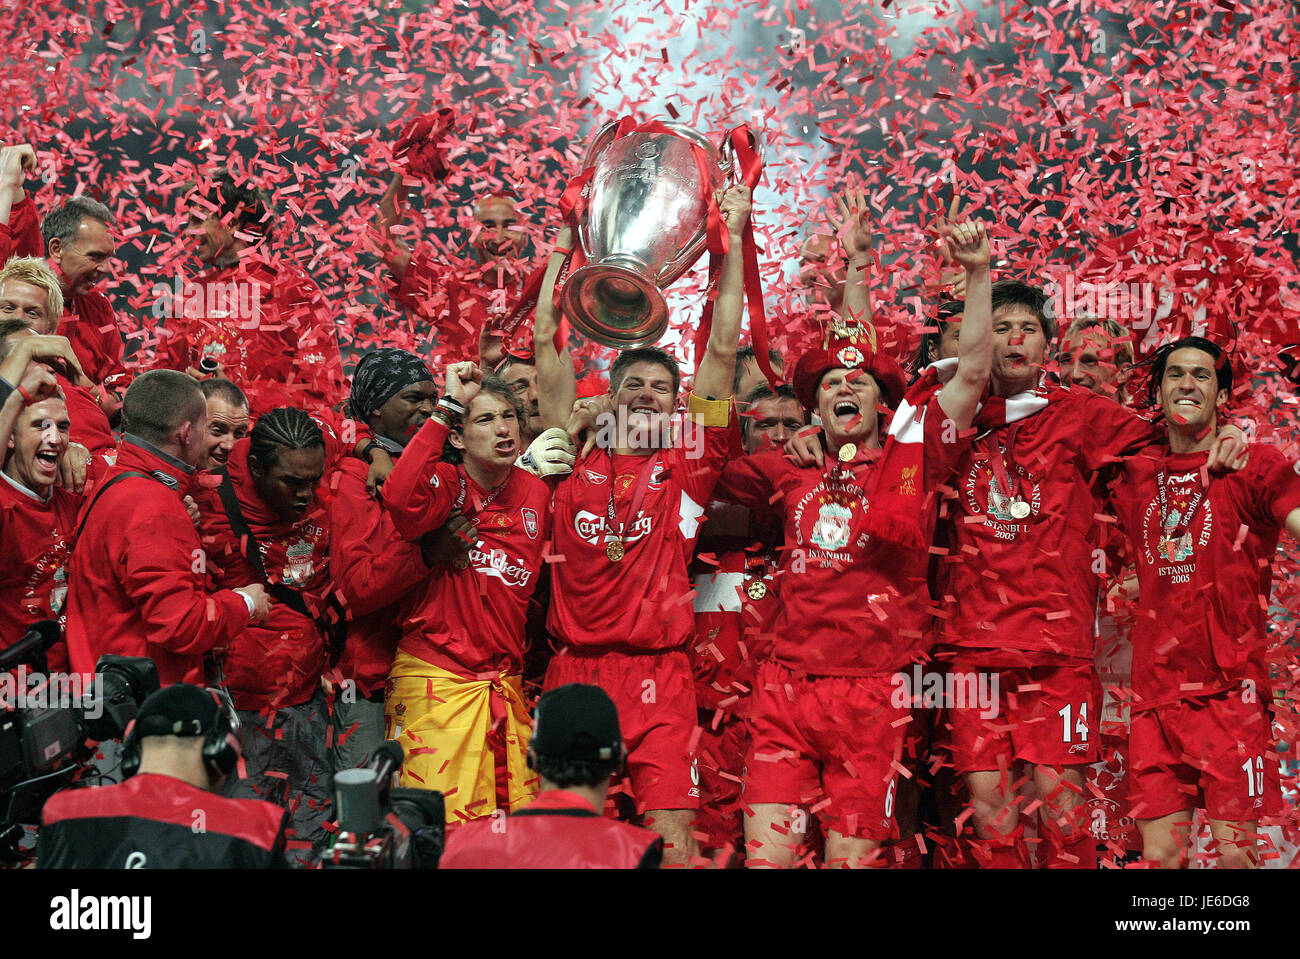 LIVERPOOL LIFT EUROPEAN CUP CHAMPIONS LEAGUE FINAL 2005 ISTANBUL TURKEY 25  May 2005 Stock Photo - Alamy